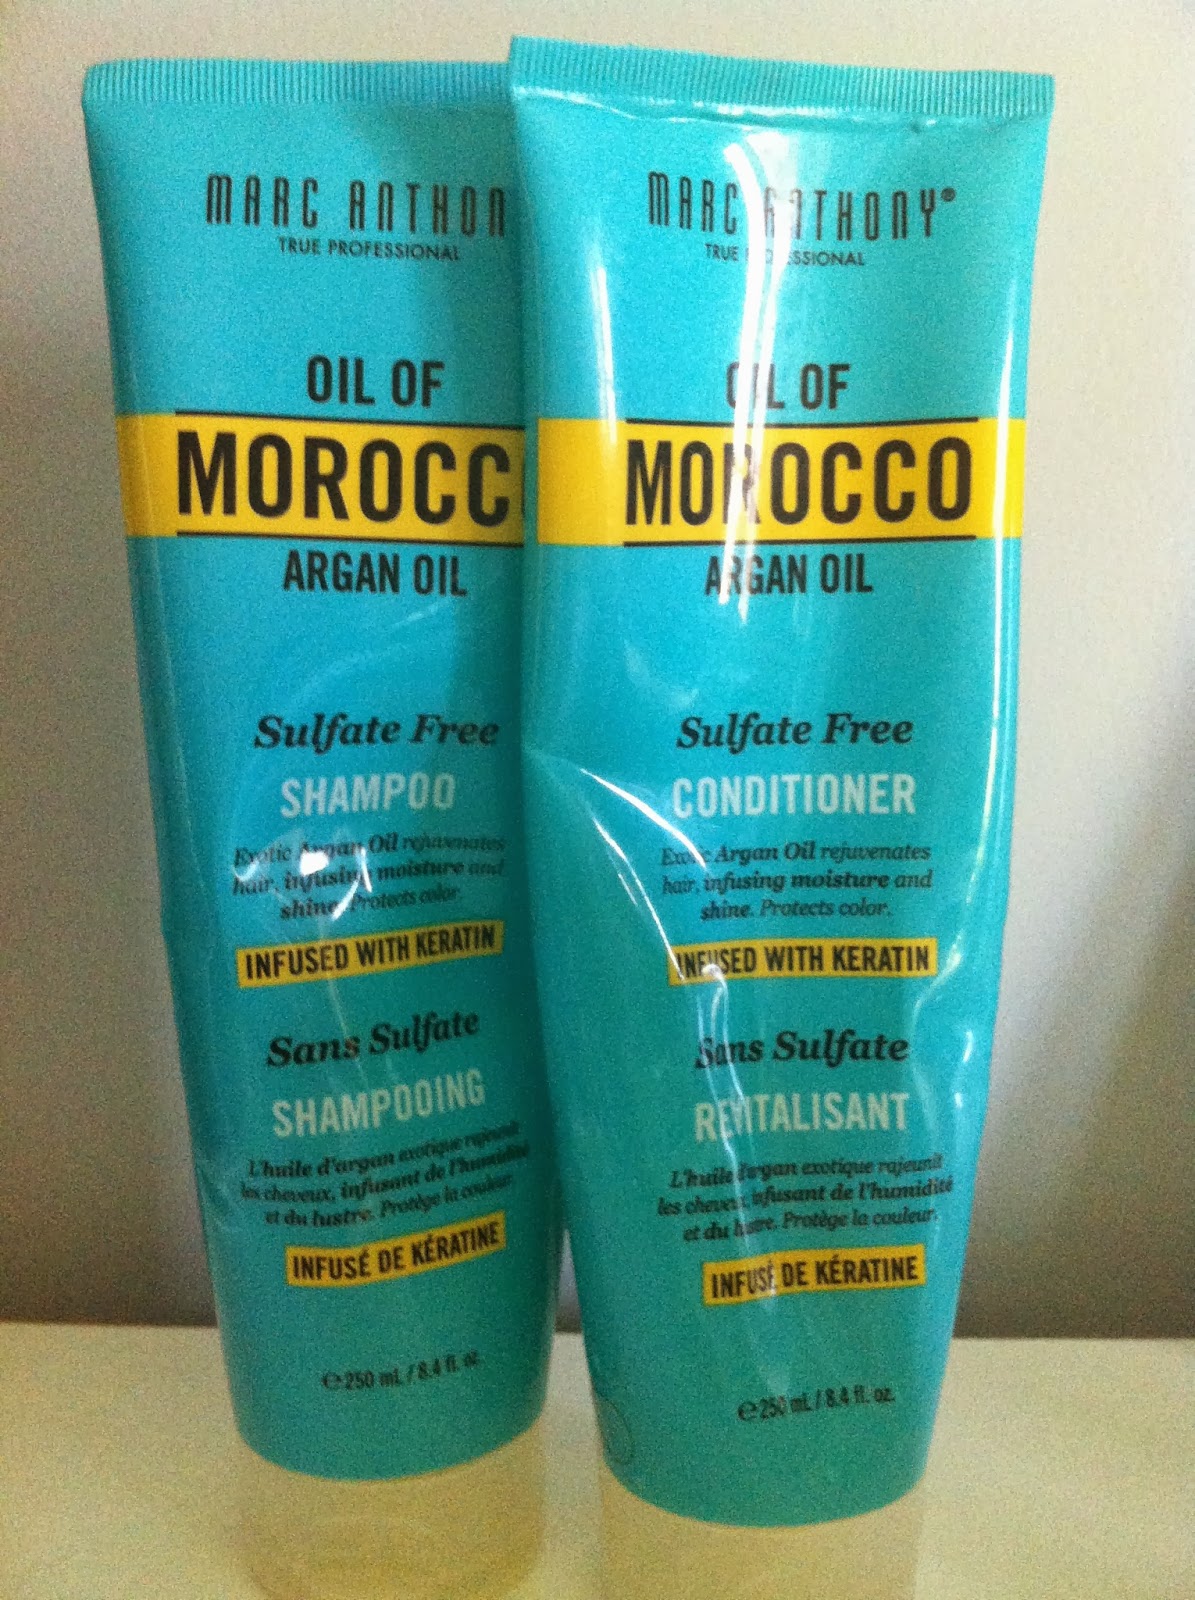 Beauty Blog Shampoo And Condtioner That Does Not Dry Your Hair